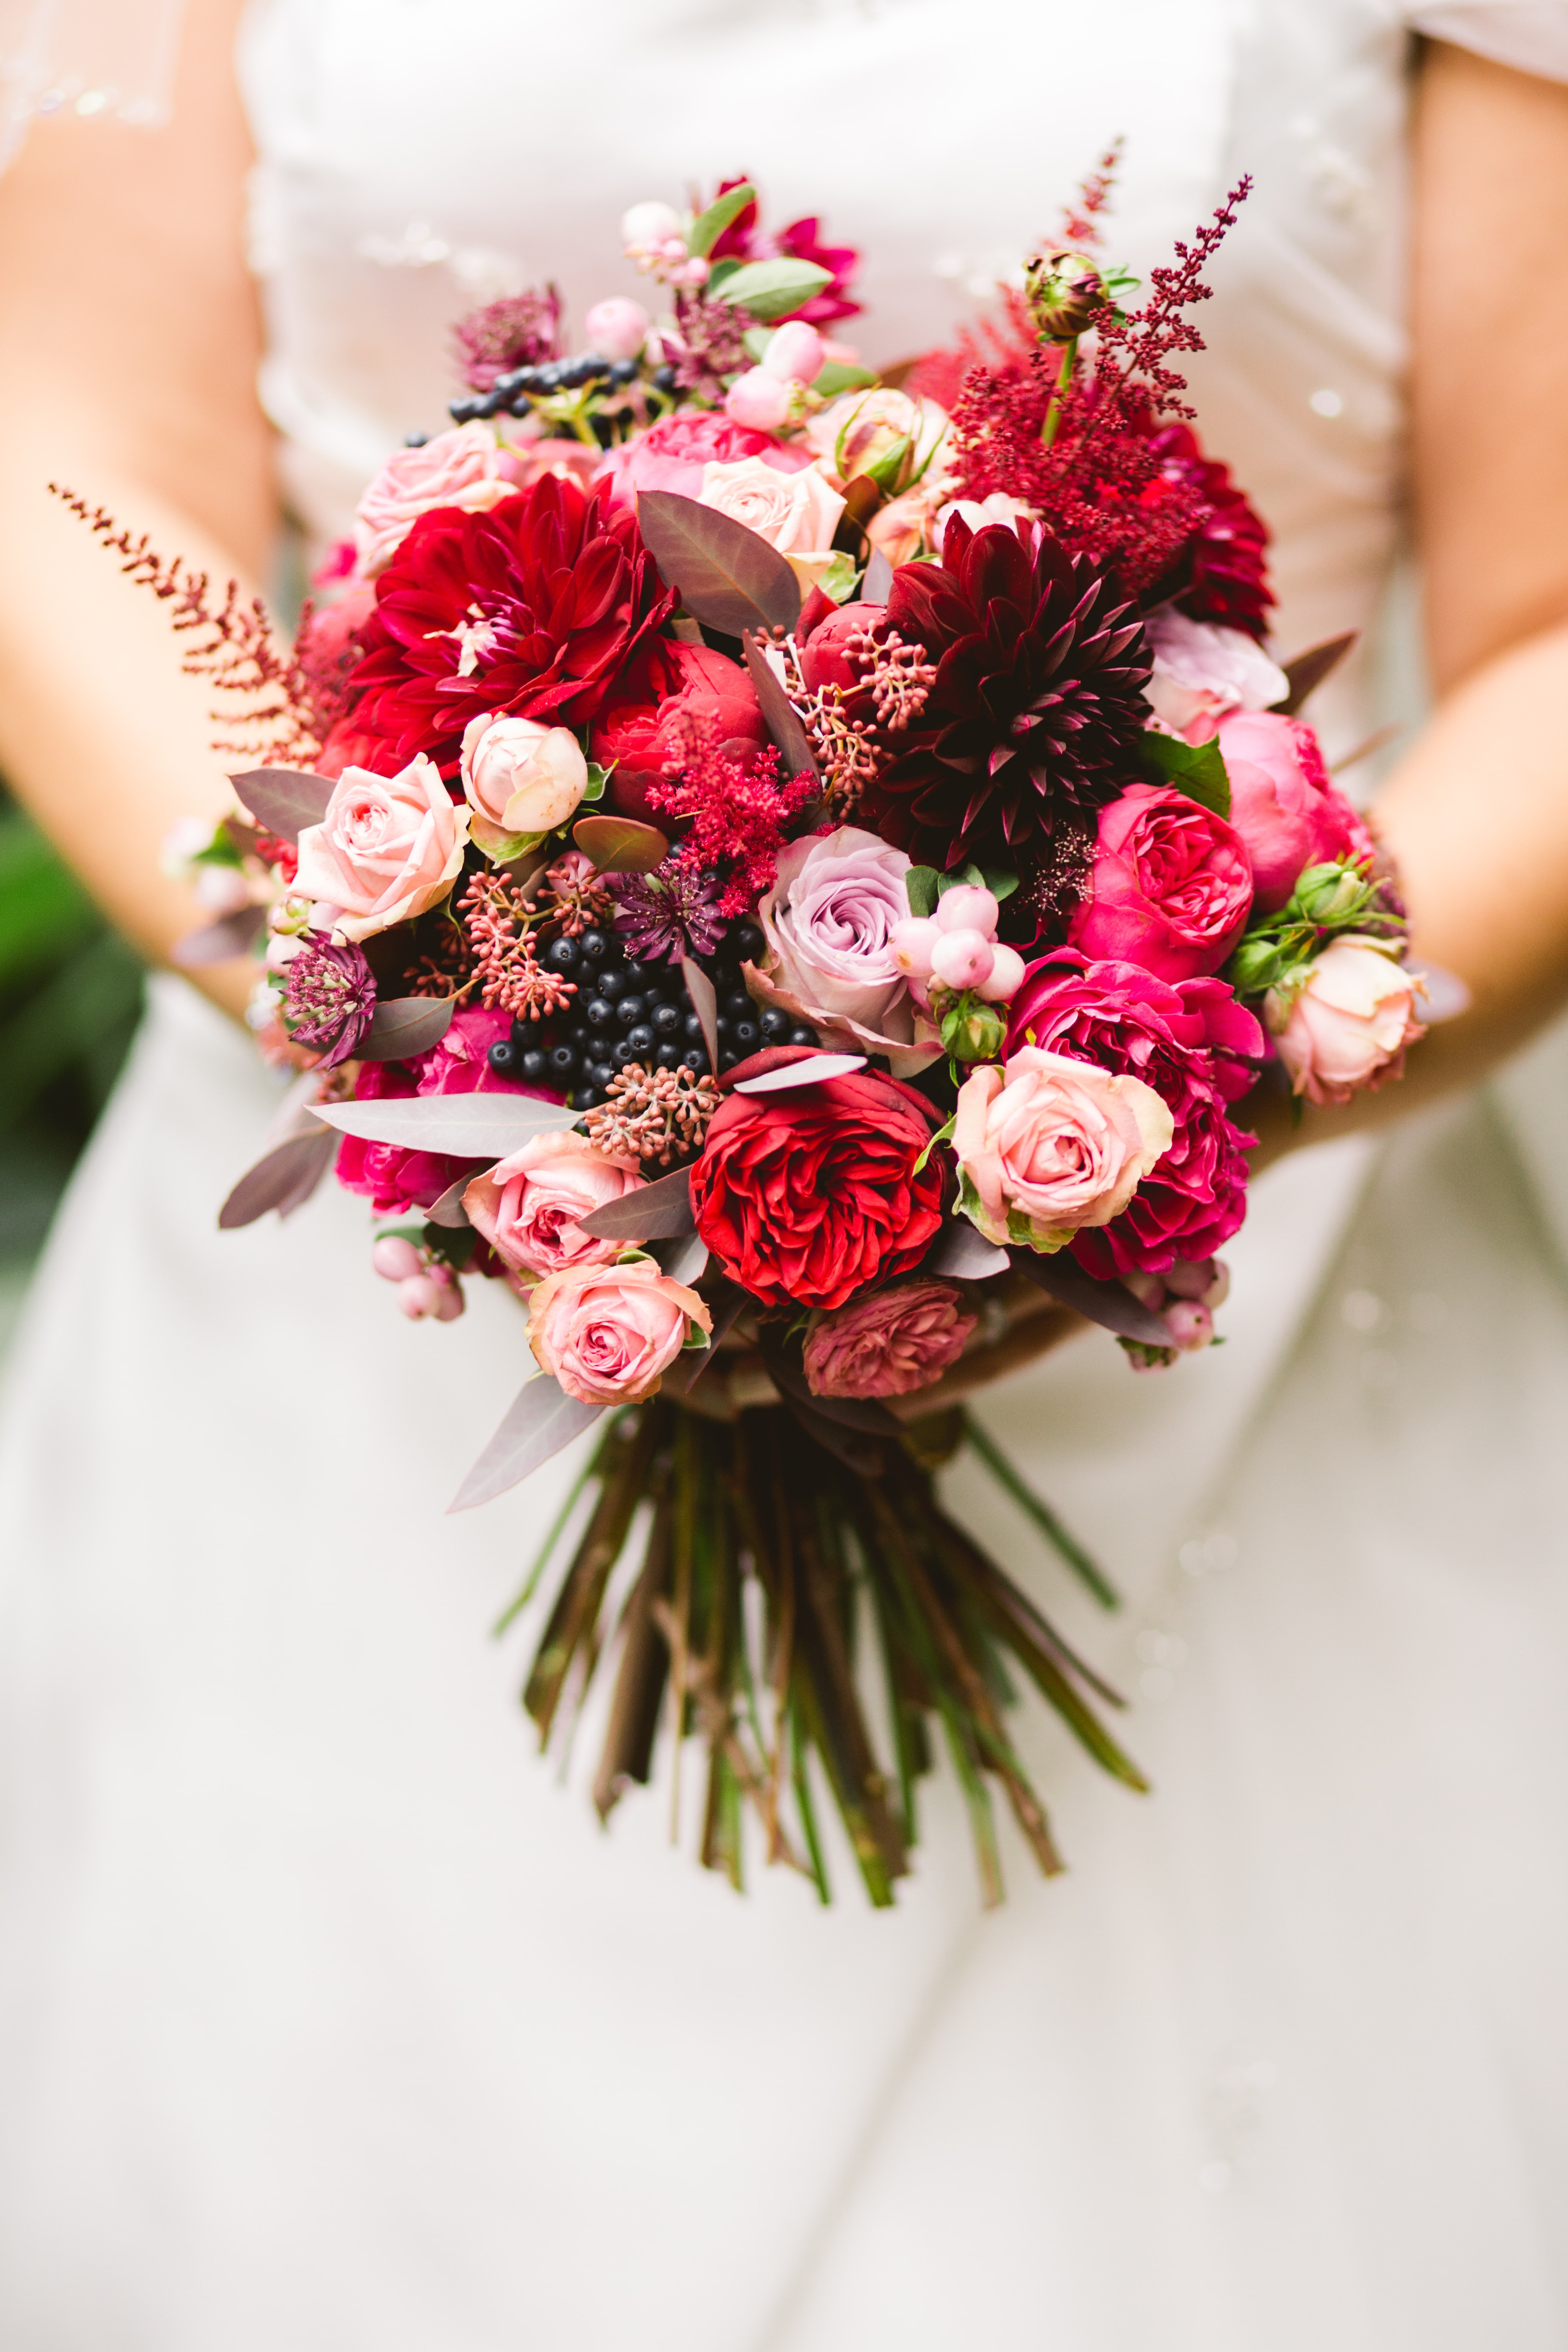 Bride holding a flower bouquet of red and pink flowers